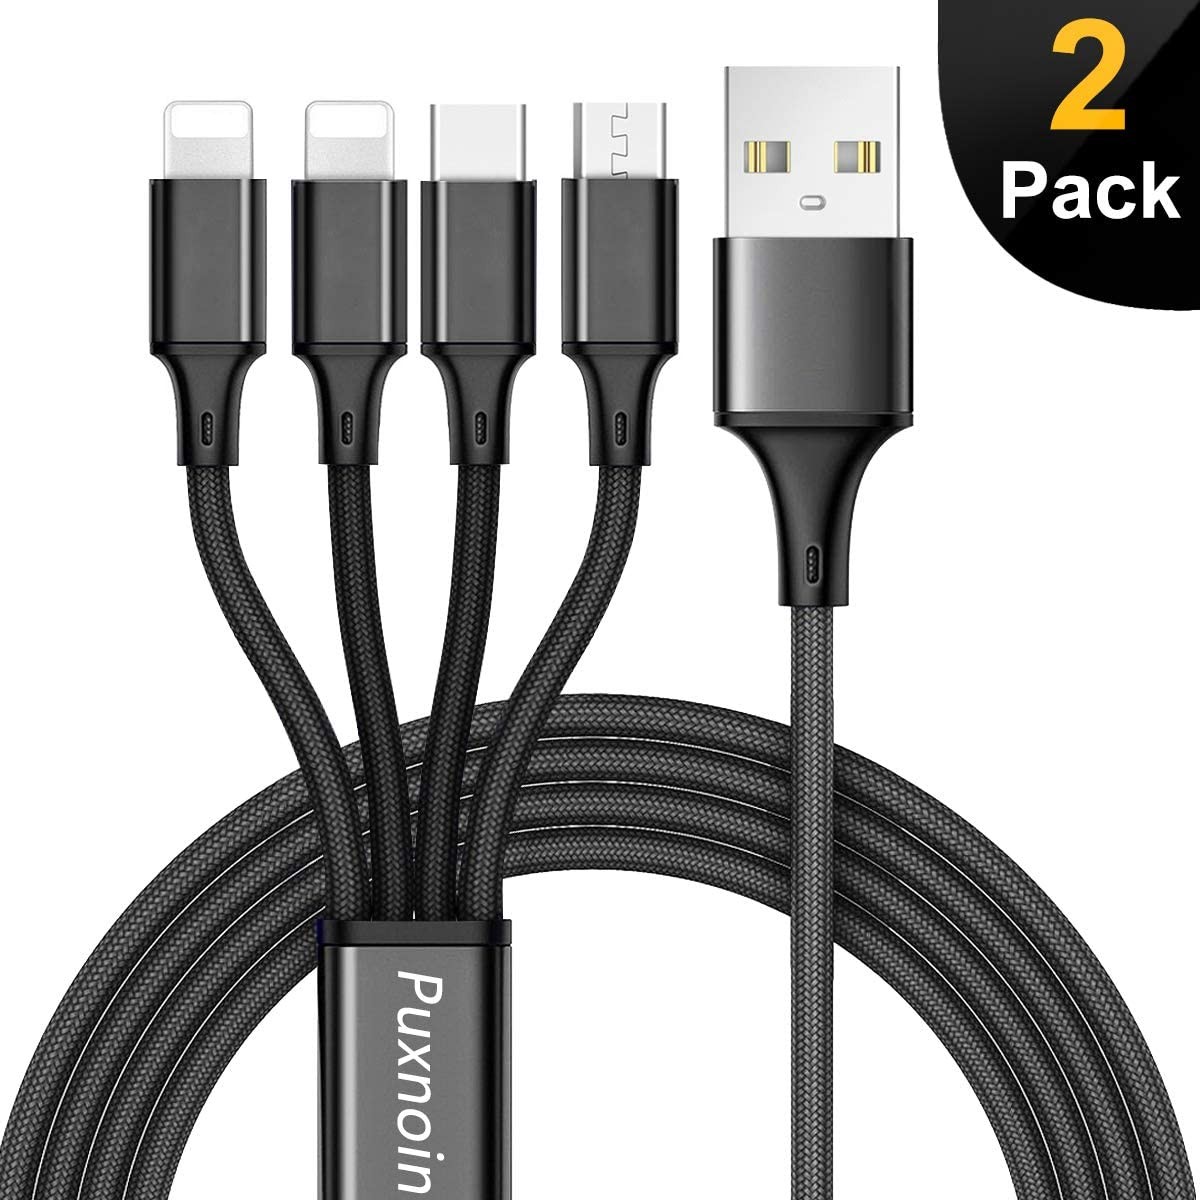 Multi Charging Cable, Multi Charger Cable 2Pack 4FT Nylon Braided Universal 4 in 1 Multiple USB